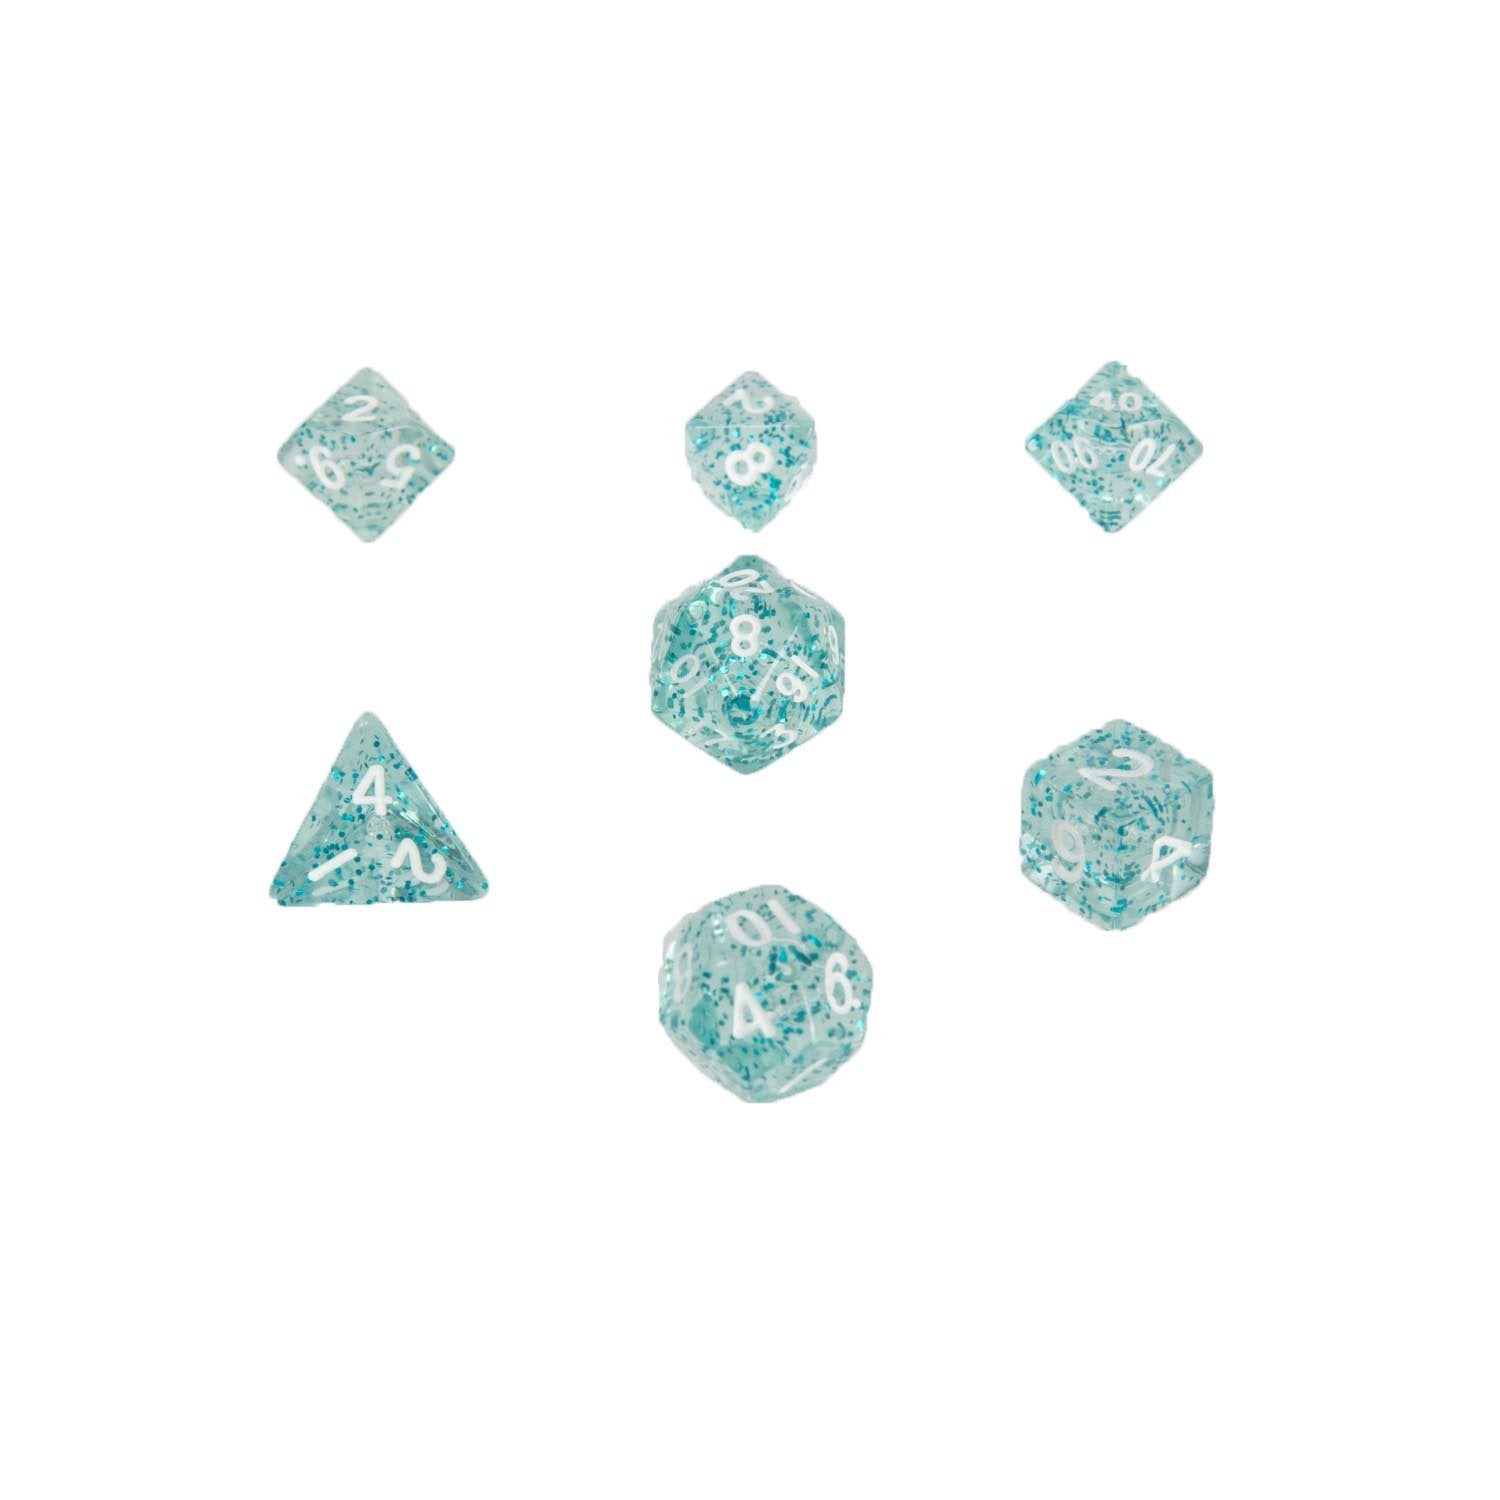 MDG 4212 Ethereal Blue with White Mini RPG Dice | Grognard Games